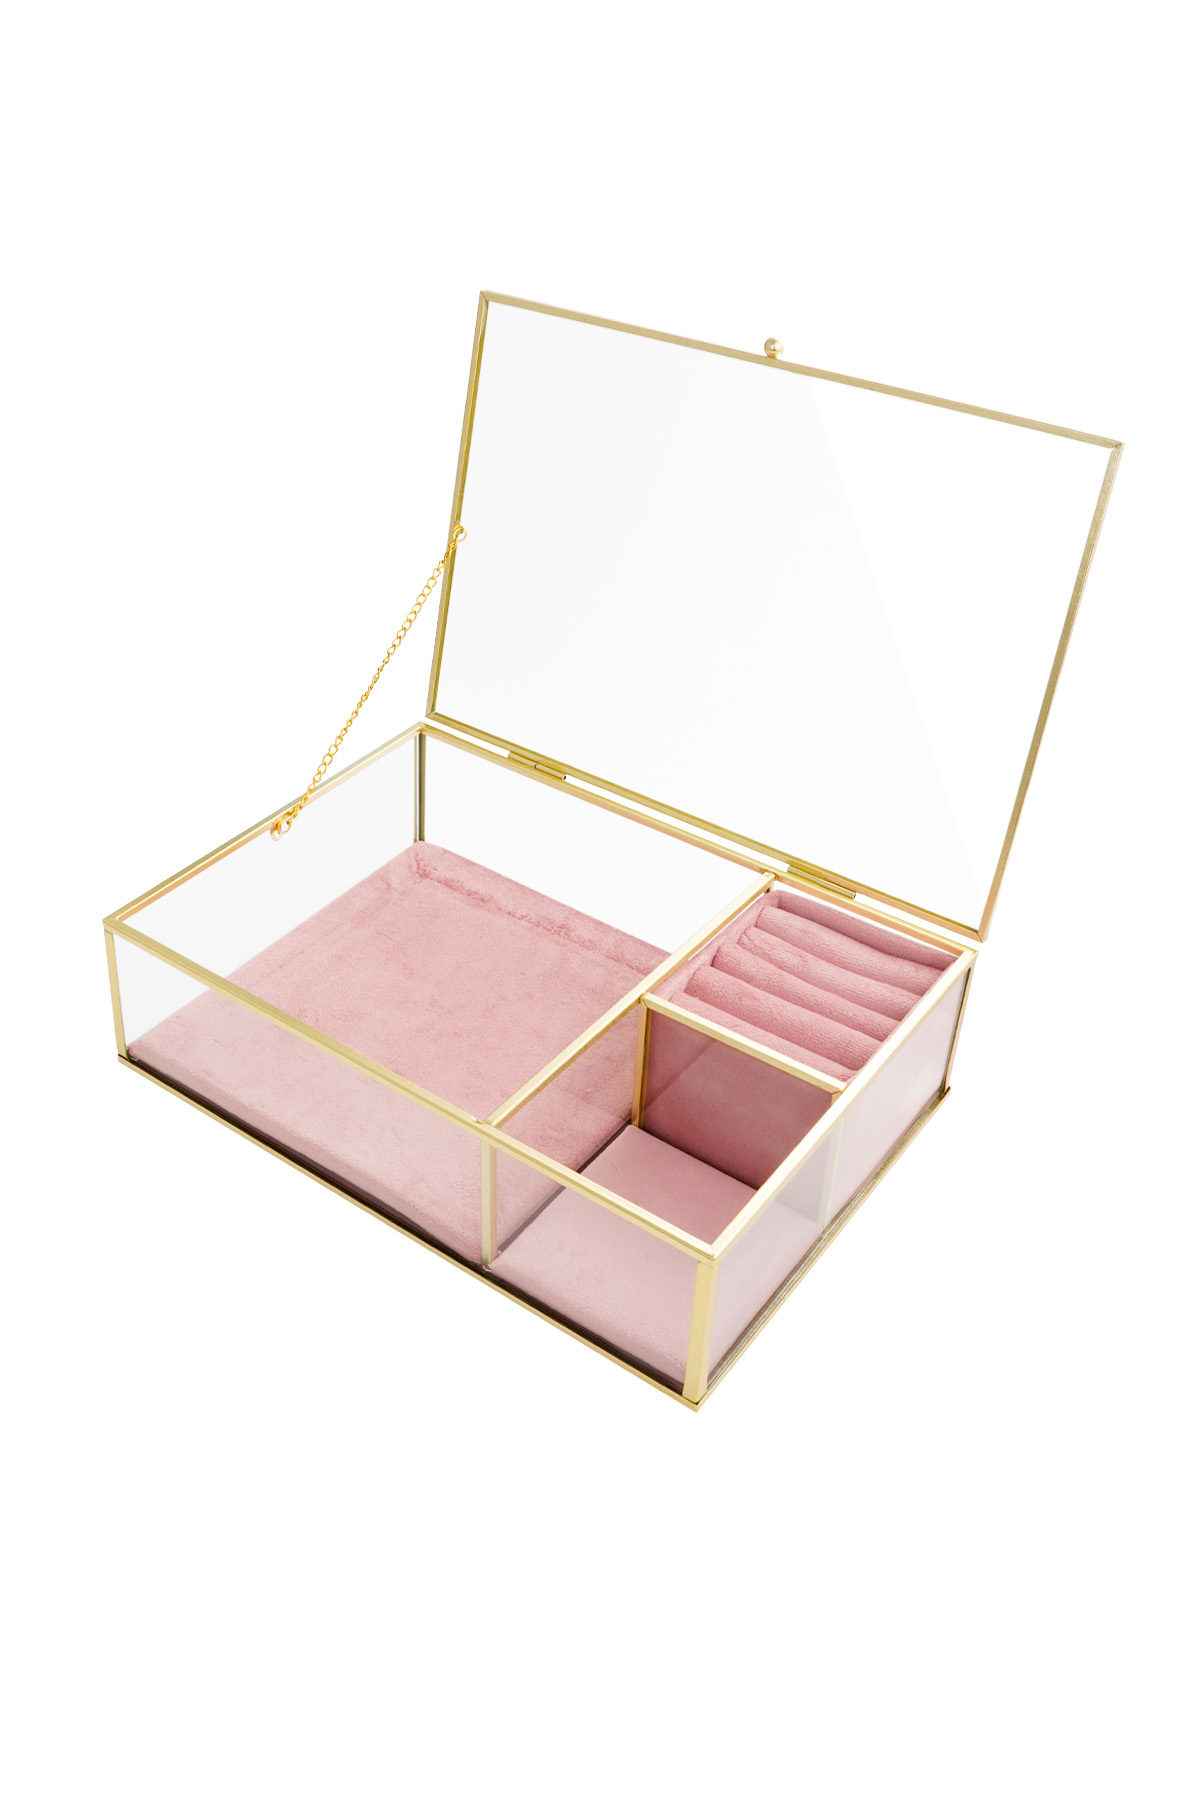 Glass three-compartment display - pink h5 